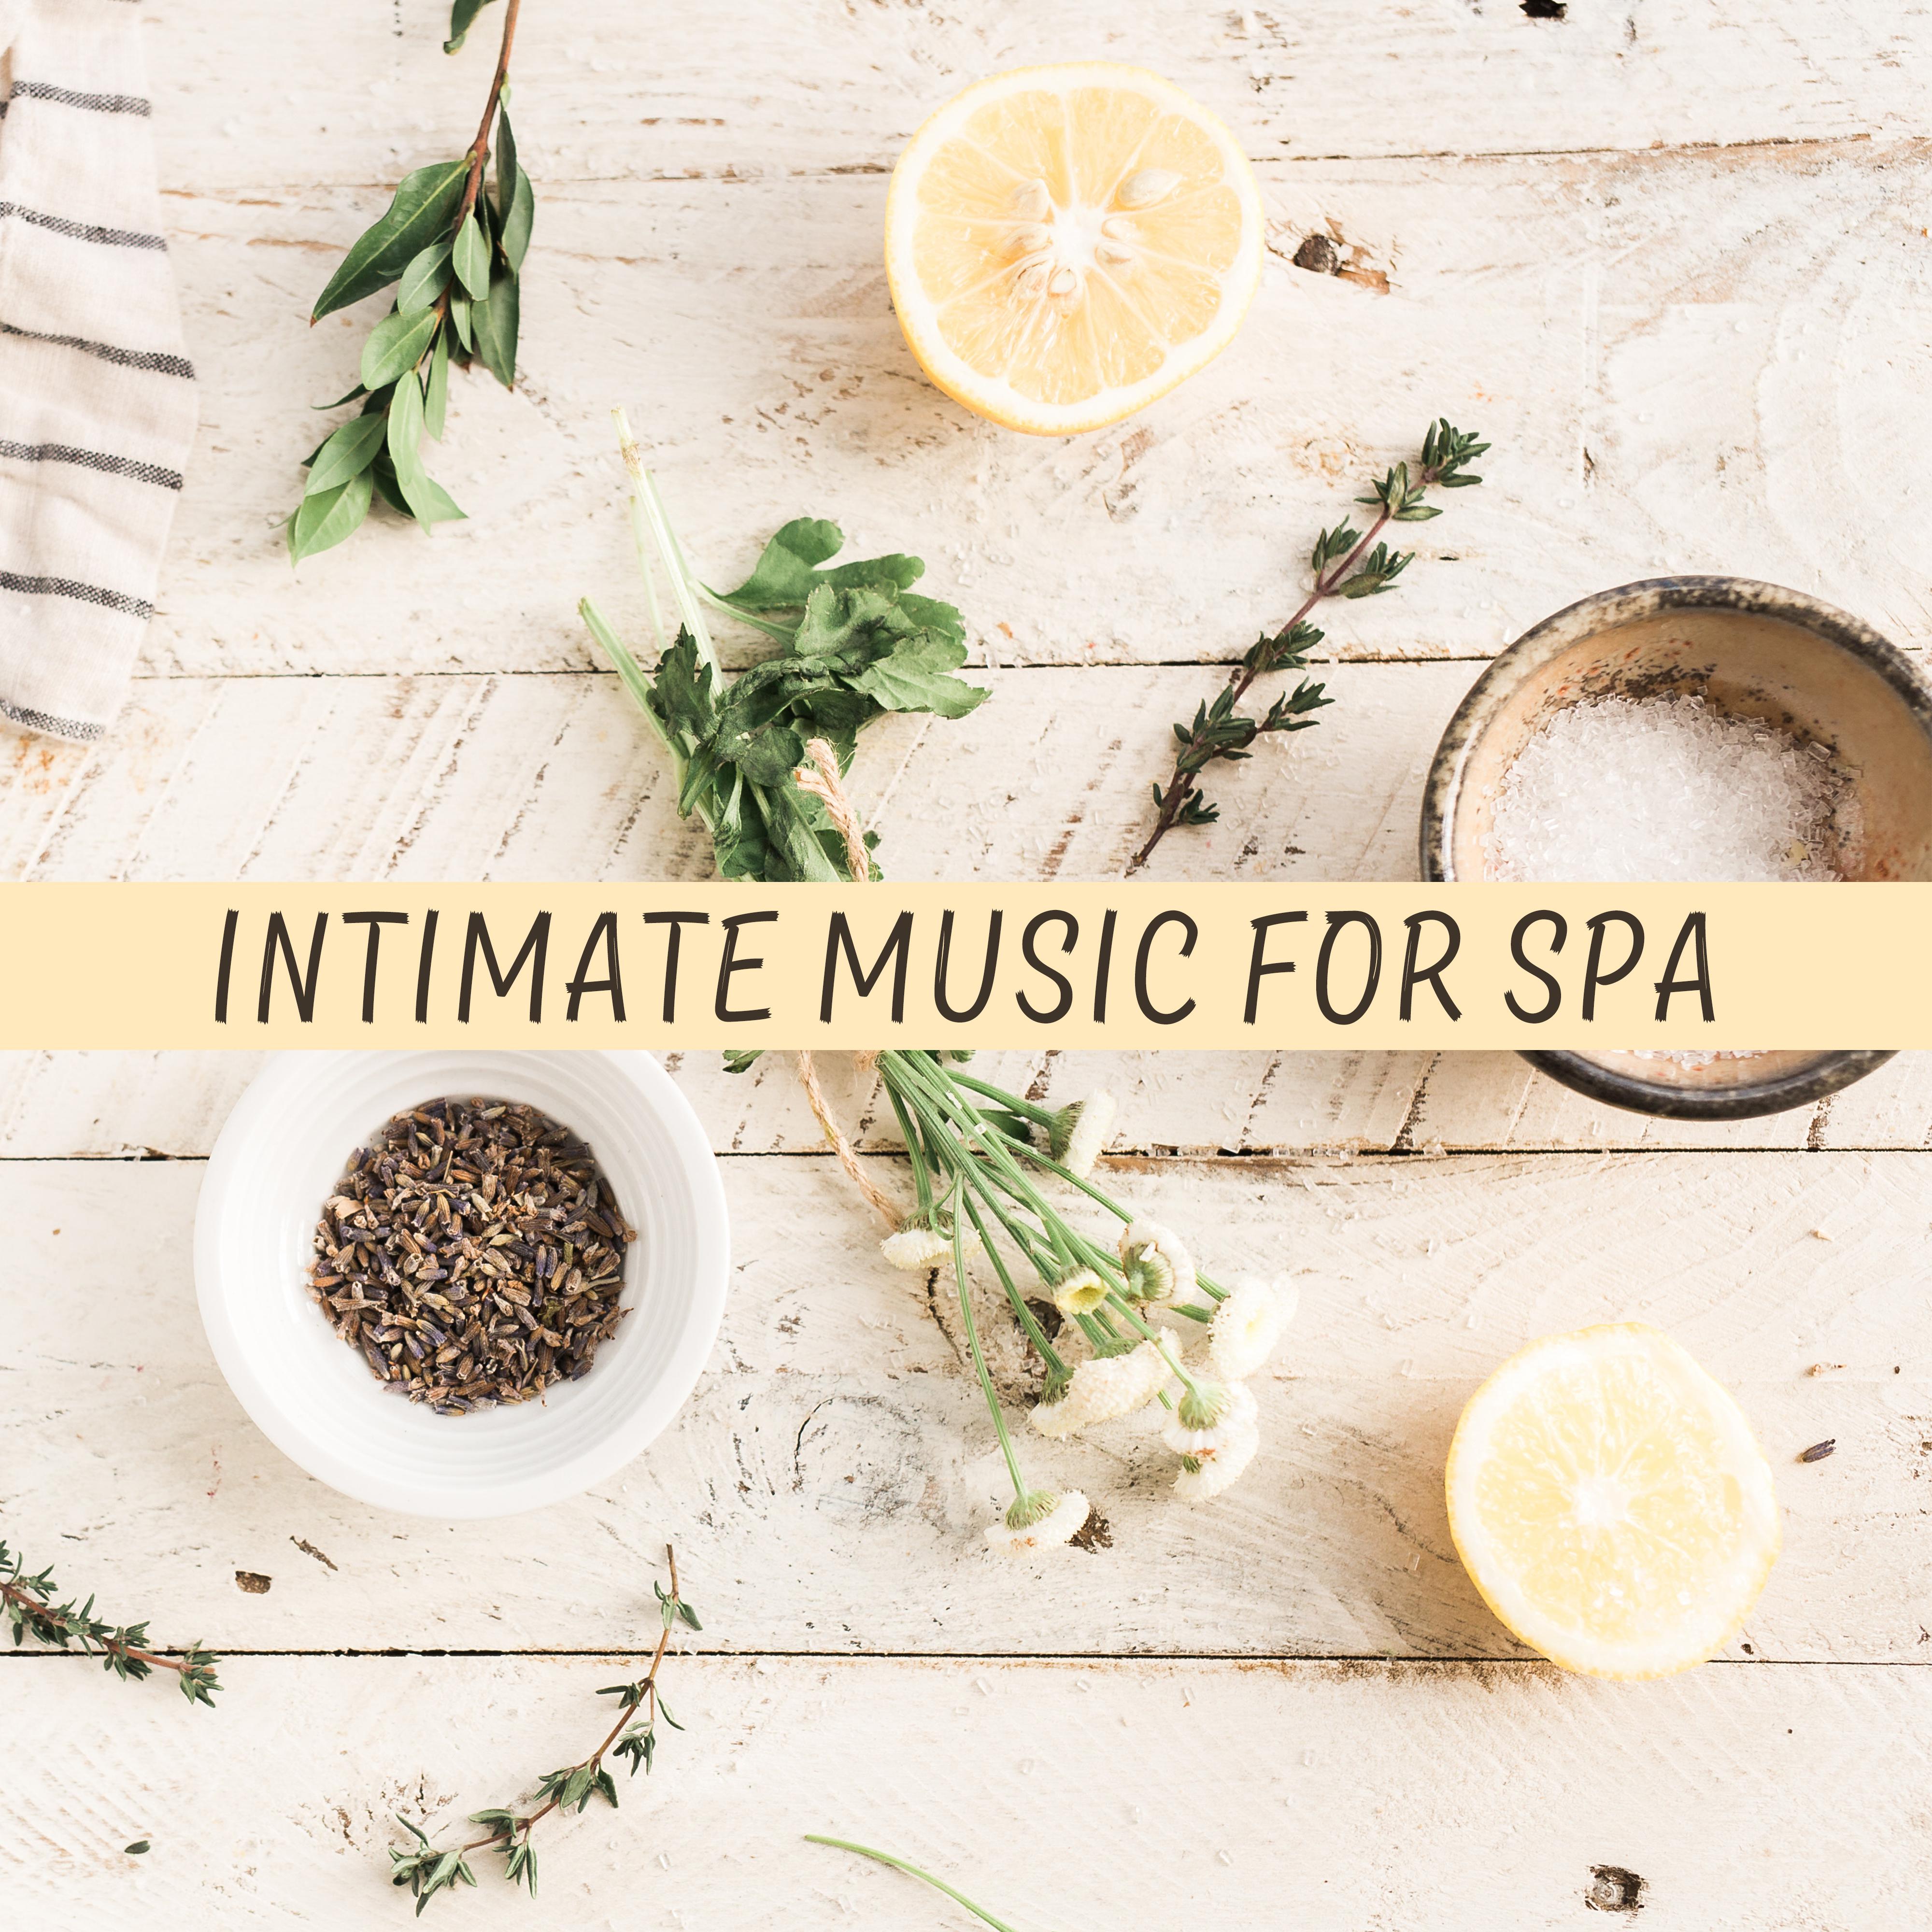 Intimate Music for Spa  Relaxation Spa, Music for Hotel Wellness  Spa, Beauty Treatments, Spa at Home